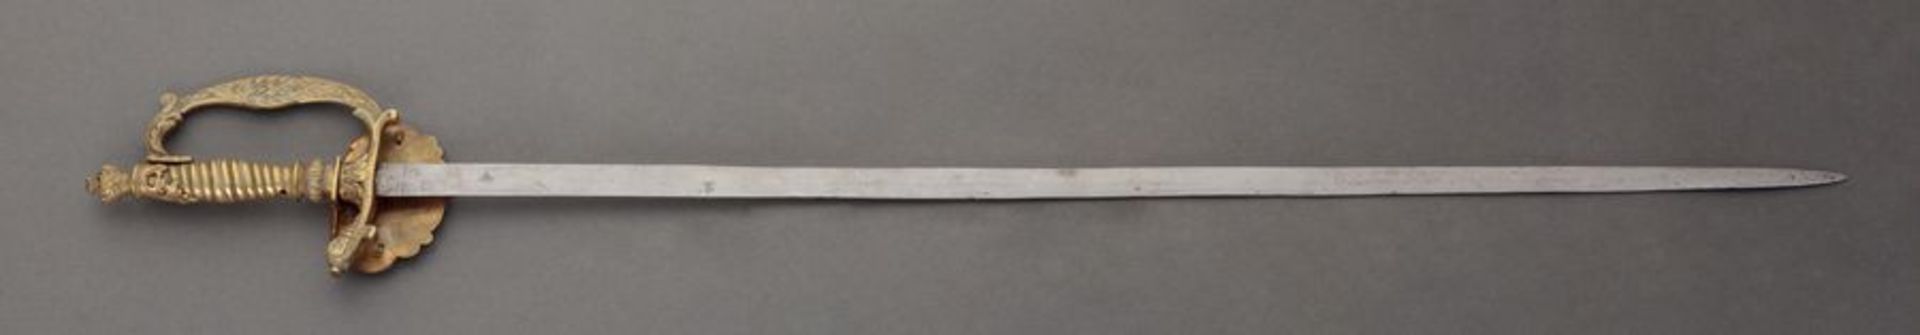 Sword of Russian civil and court of cials based on the version of 1855, without a [...] - Bild 2 aus 3